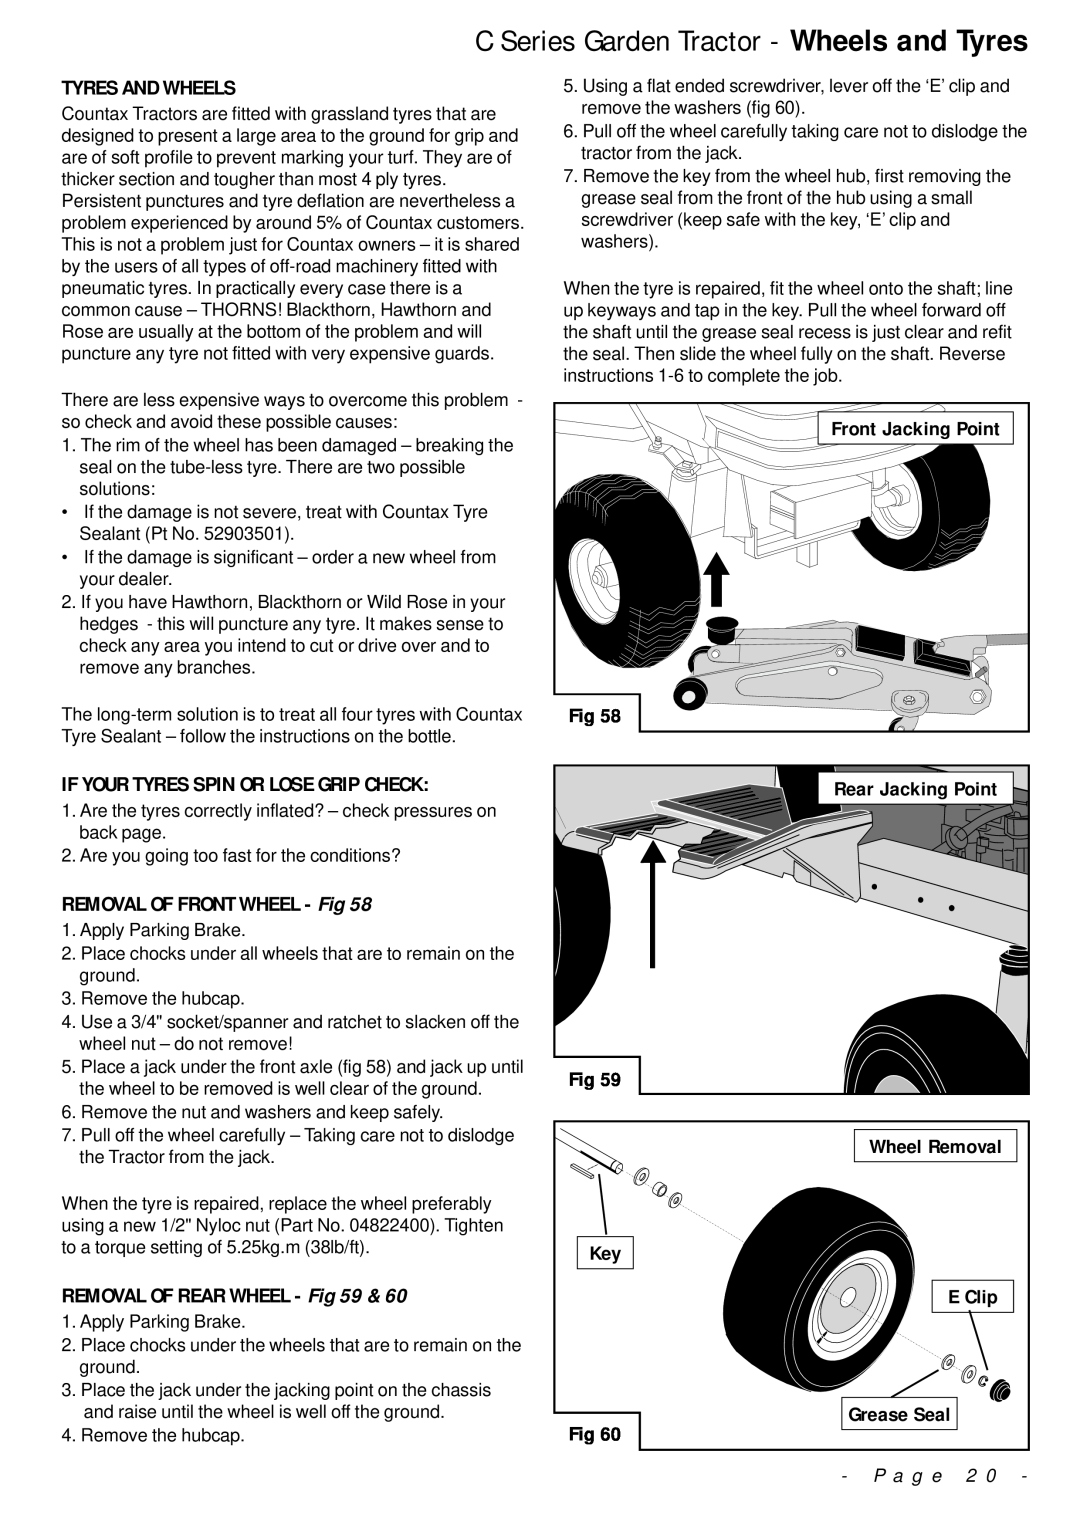 Countax C Series Garden Tractor - Wheels and Tyres, Tyres And Wheels, If Your Tyres Spin Or Lose Grip Check, P a g e 2 